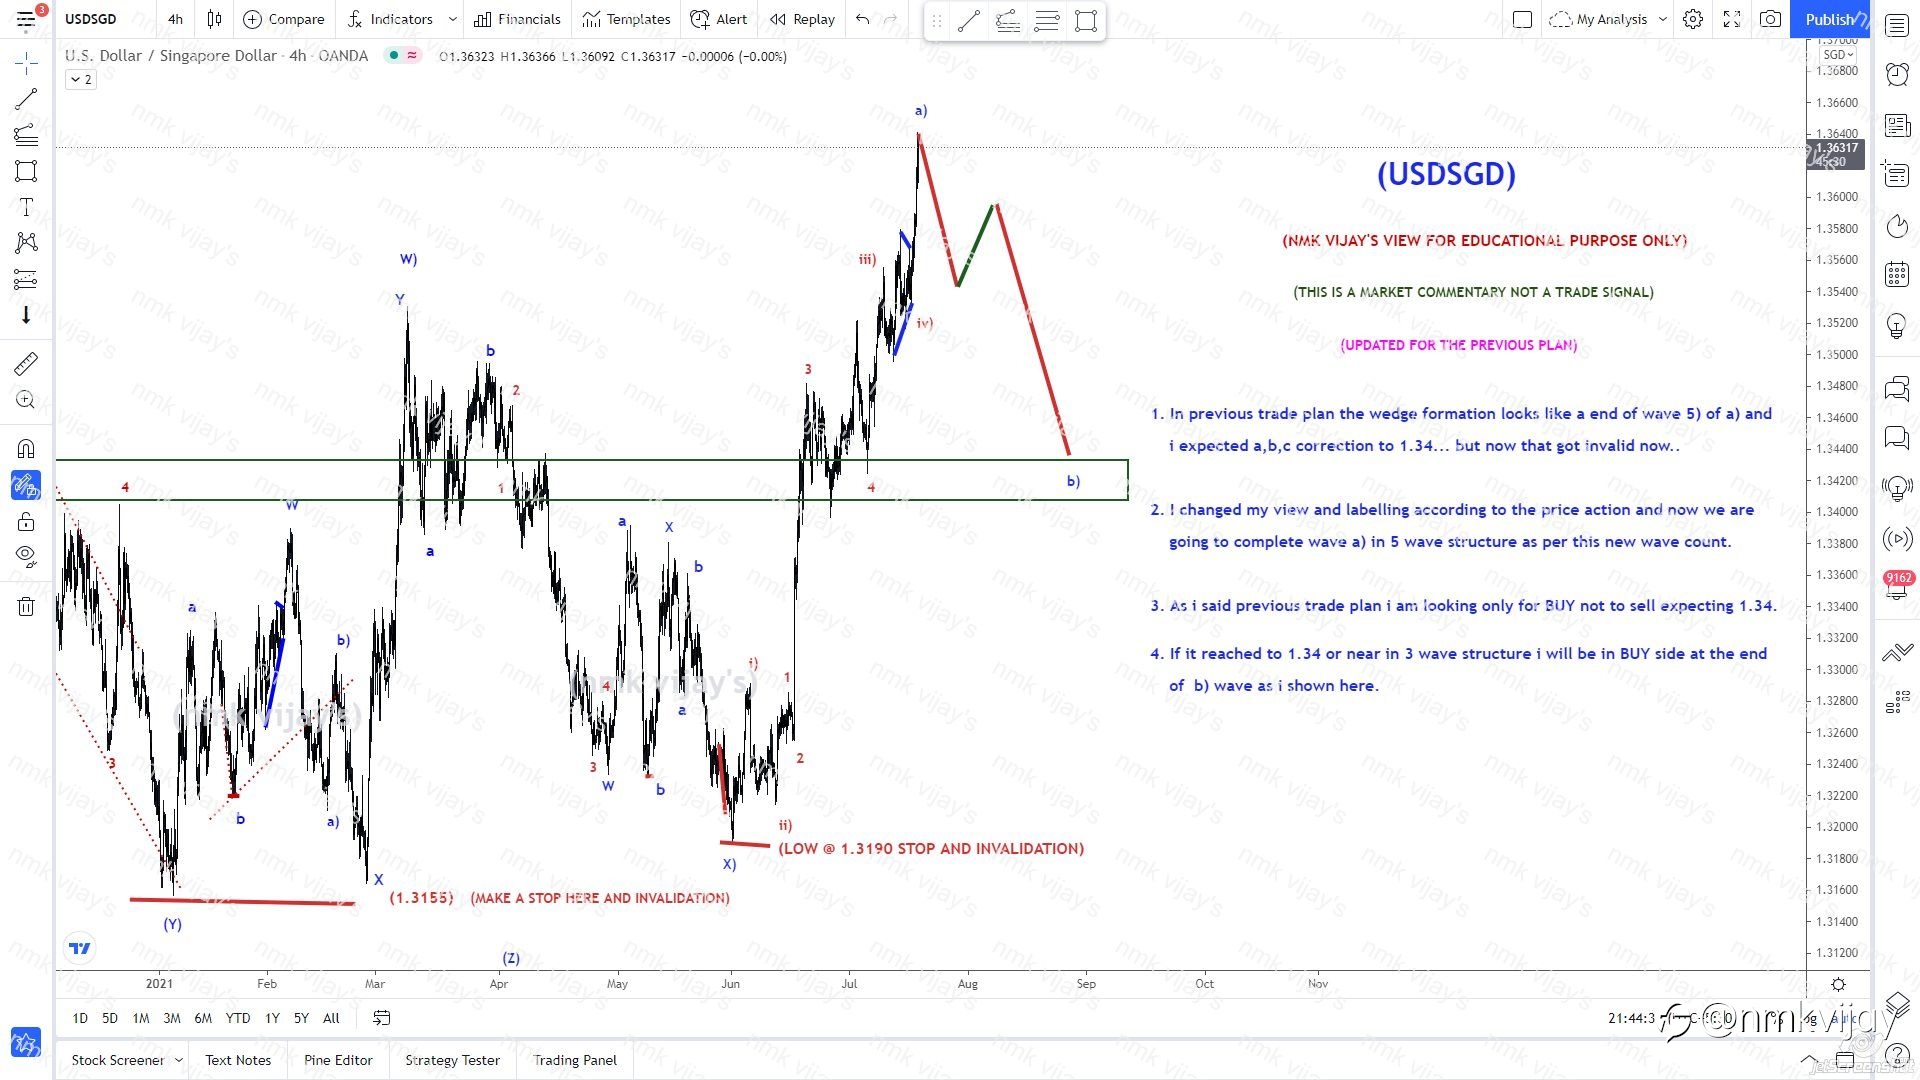 USDSGD-Expecting for correction for b) wave...labelling changed.